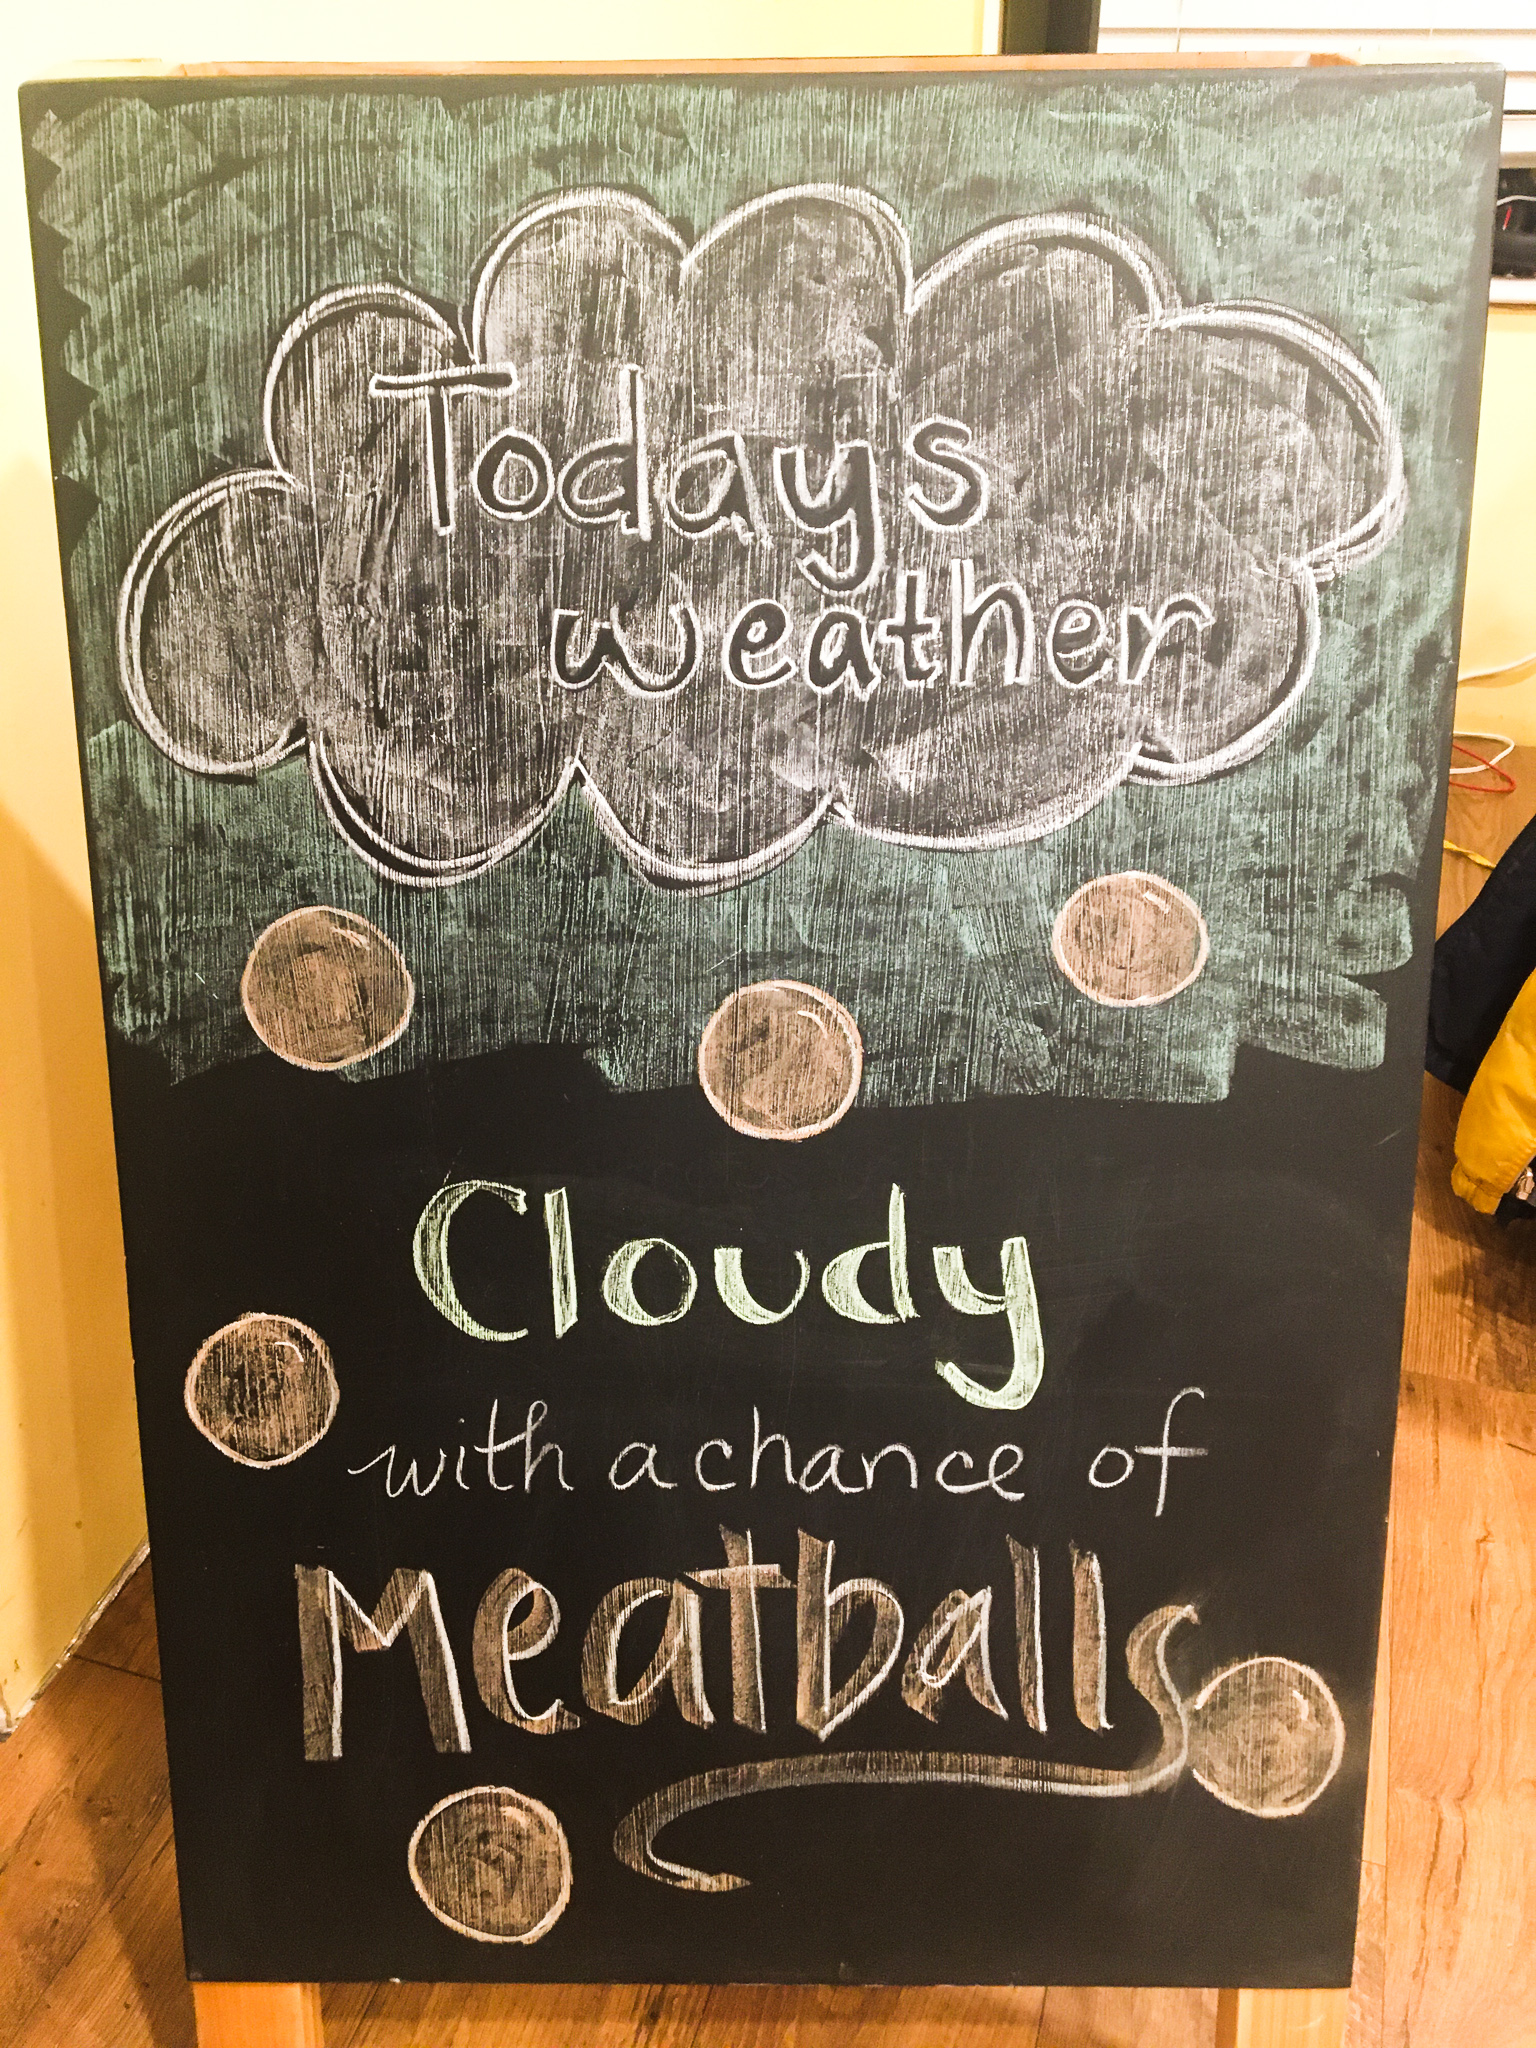 How to: Cloudy with a Chance of Meatballs Chalkboard | mamasbrush

Add a touch of art to your party or event with these tips to make your own. Pea soup fog, meatballs falling from the sky, clouds and hand lettering!